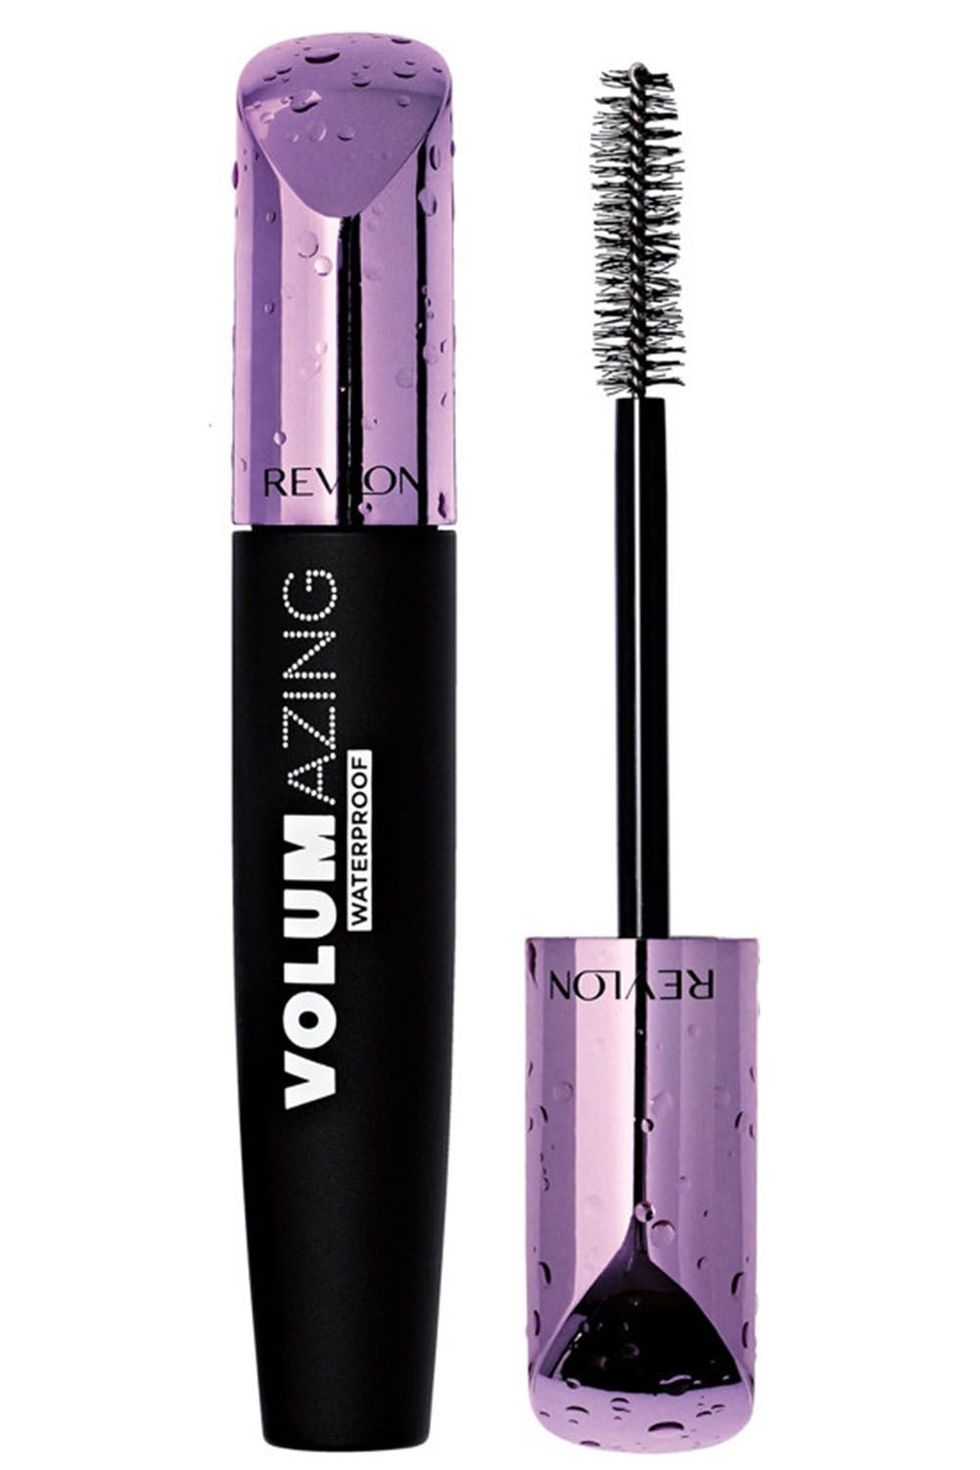 15 Best Waterproof Mascaras of 2020 for Thick, Long-Lasting Lashes